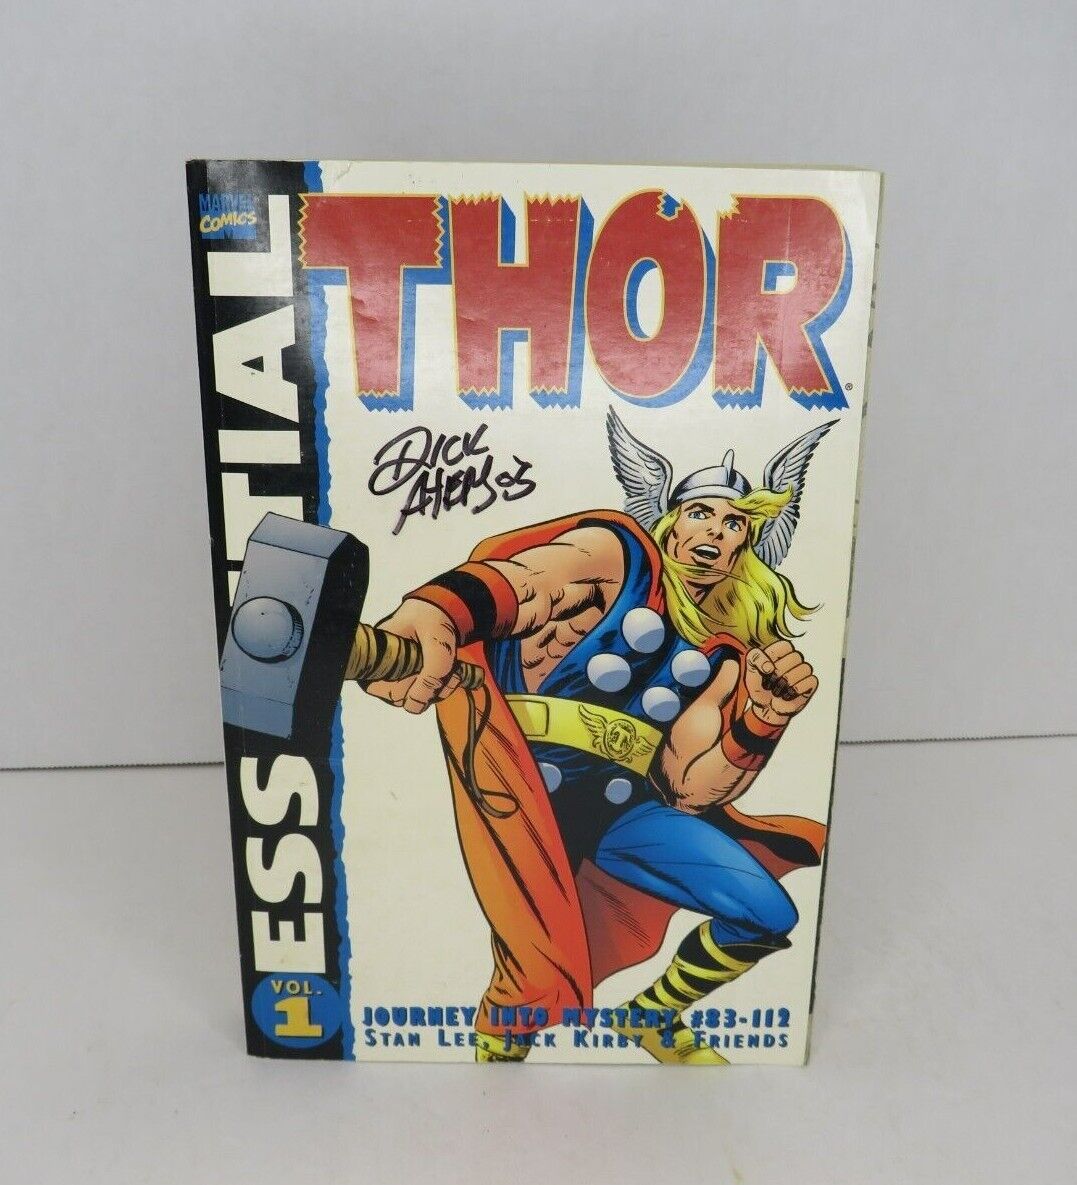 Essential Thor Volume 1 by Stan Lee Paperback Signed Rare